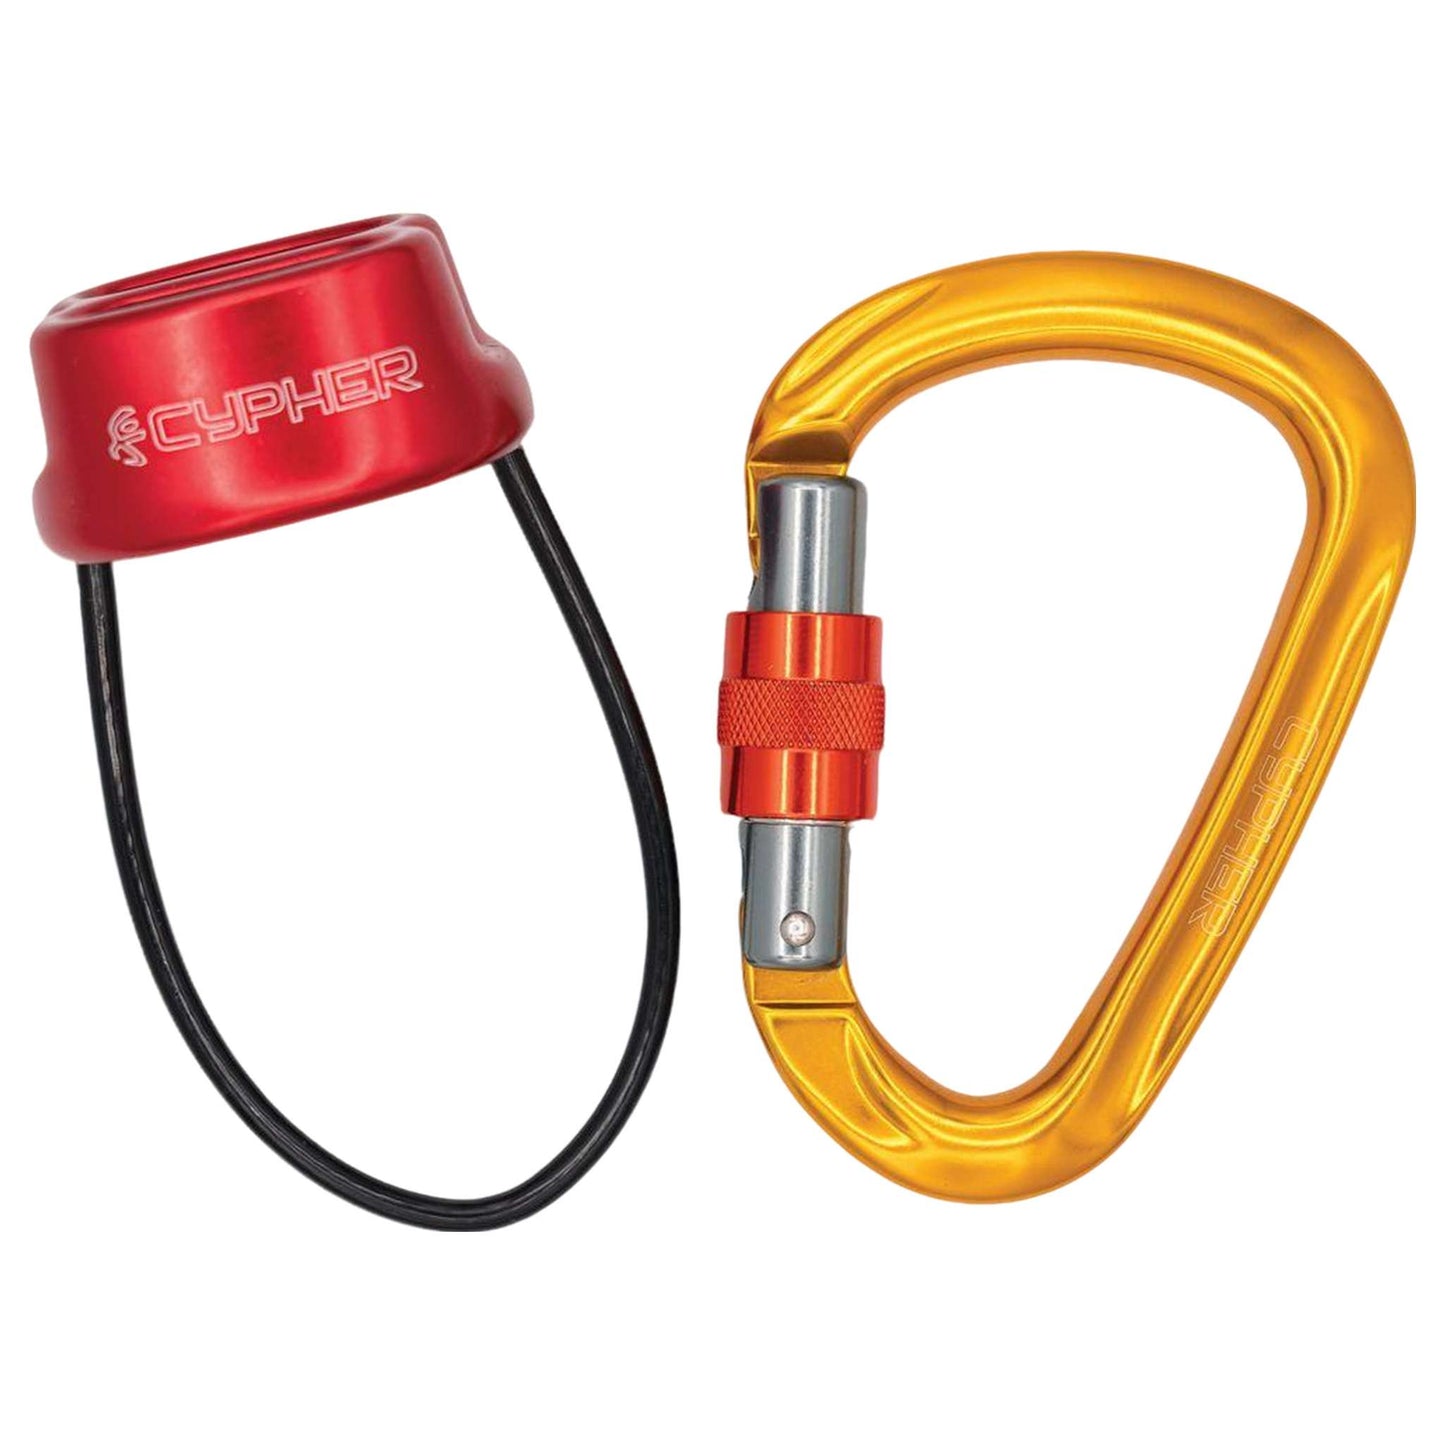 ARC Belay Device & HMS Carabiner Kit – Secure & Smooth Climbing Control